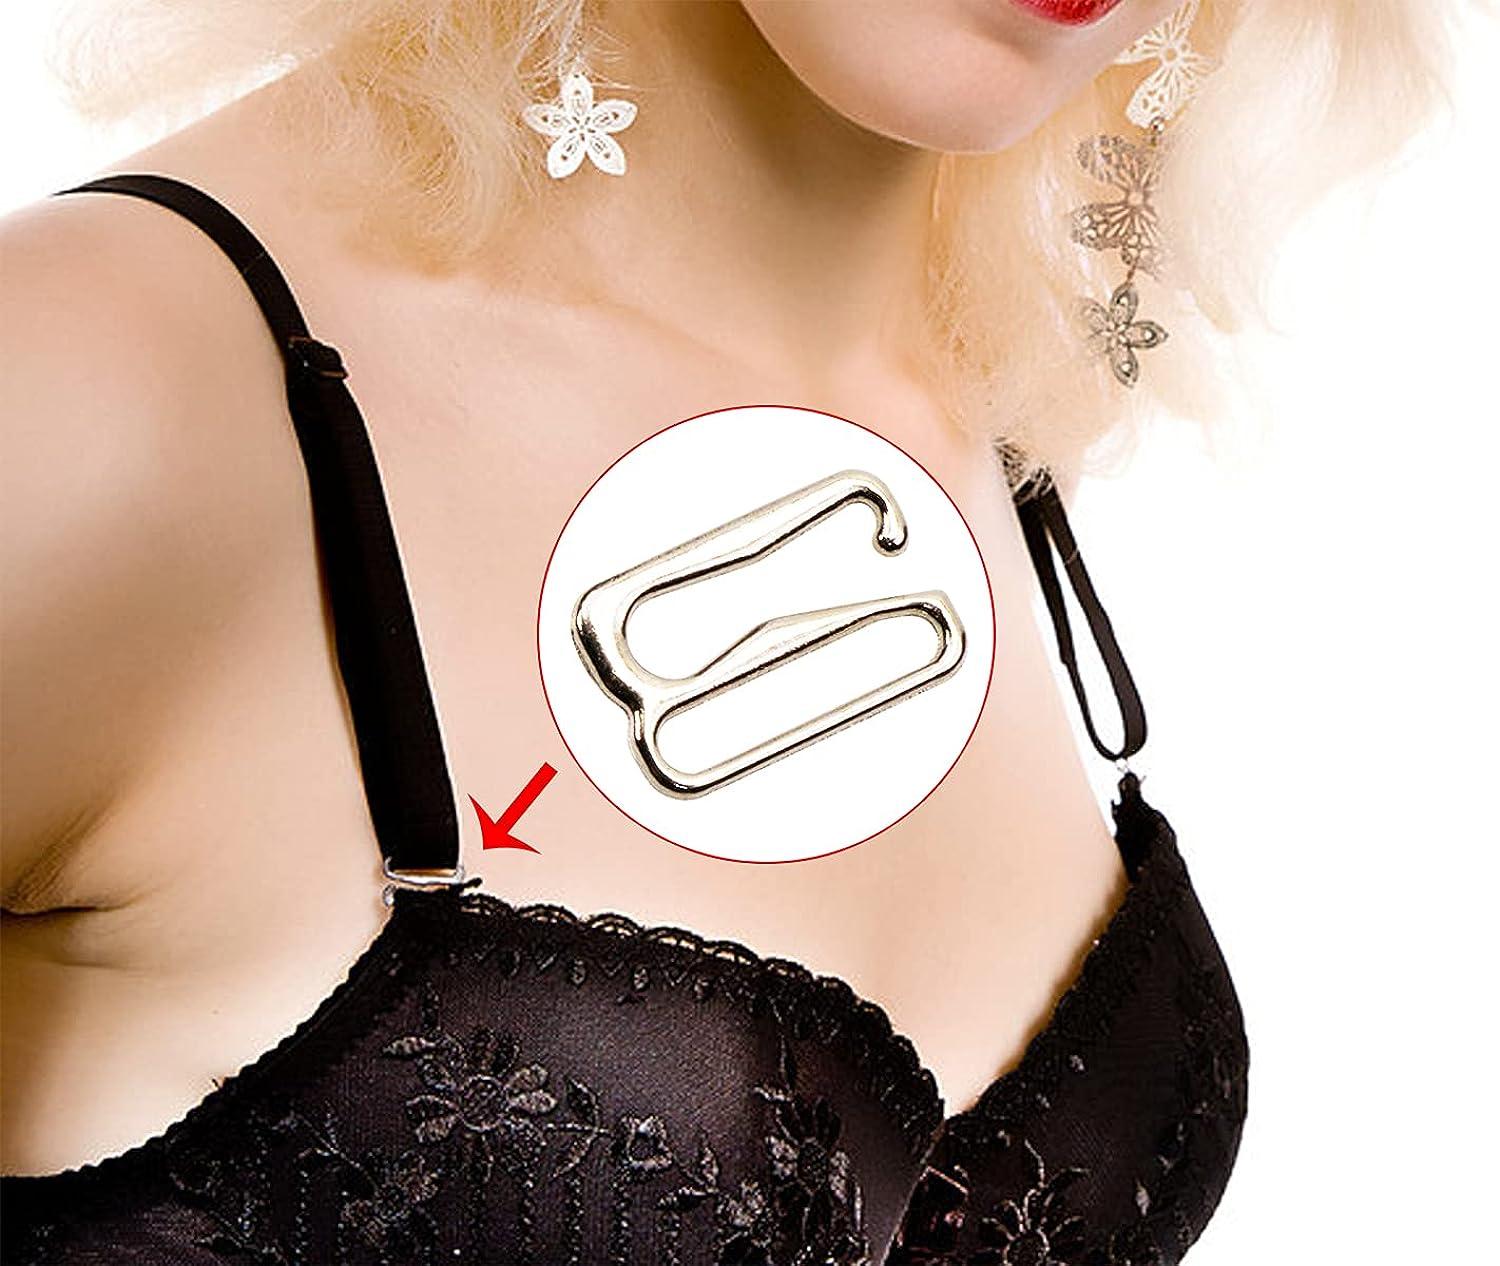 No Sew) Swimsuit Bra Hook Replacements